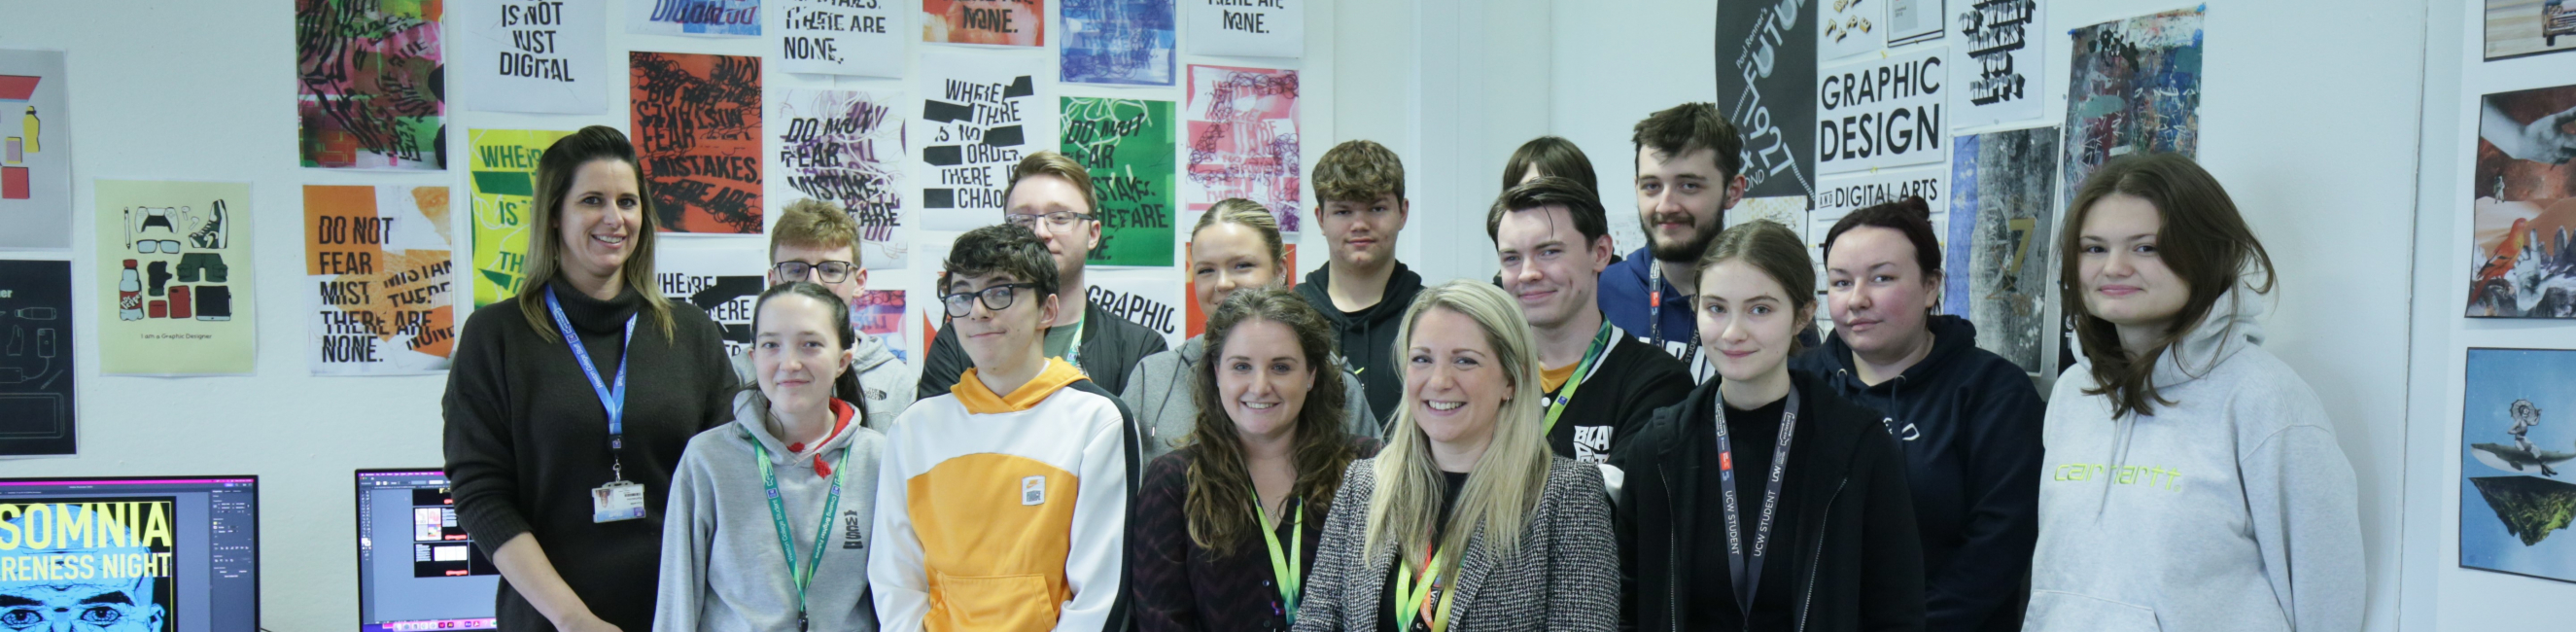 Group photograph of students who took part in the competition to design the logo